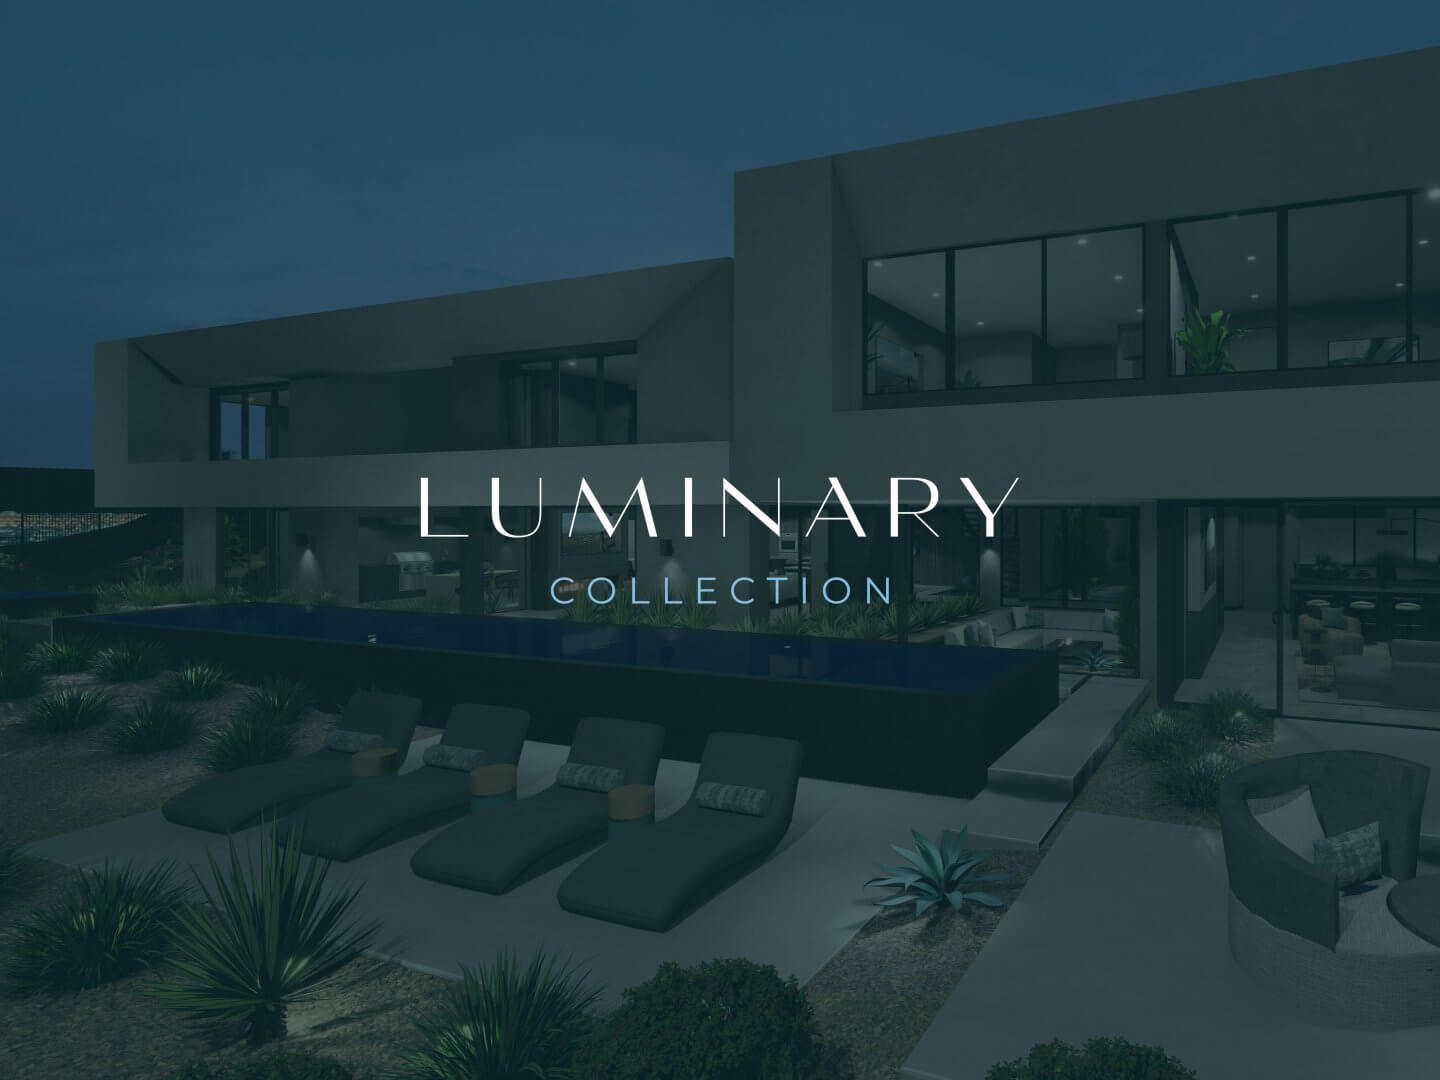 The Luminary Collection